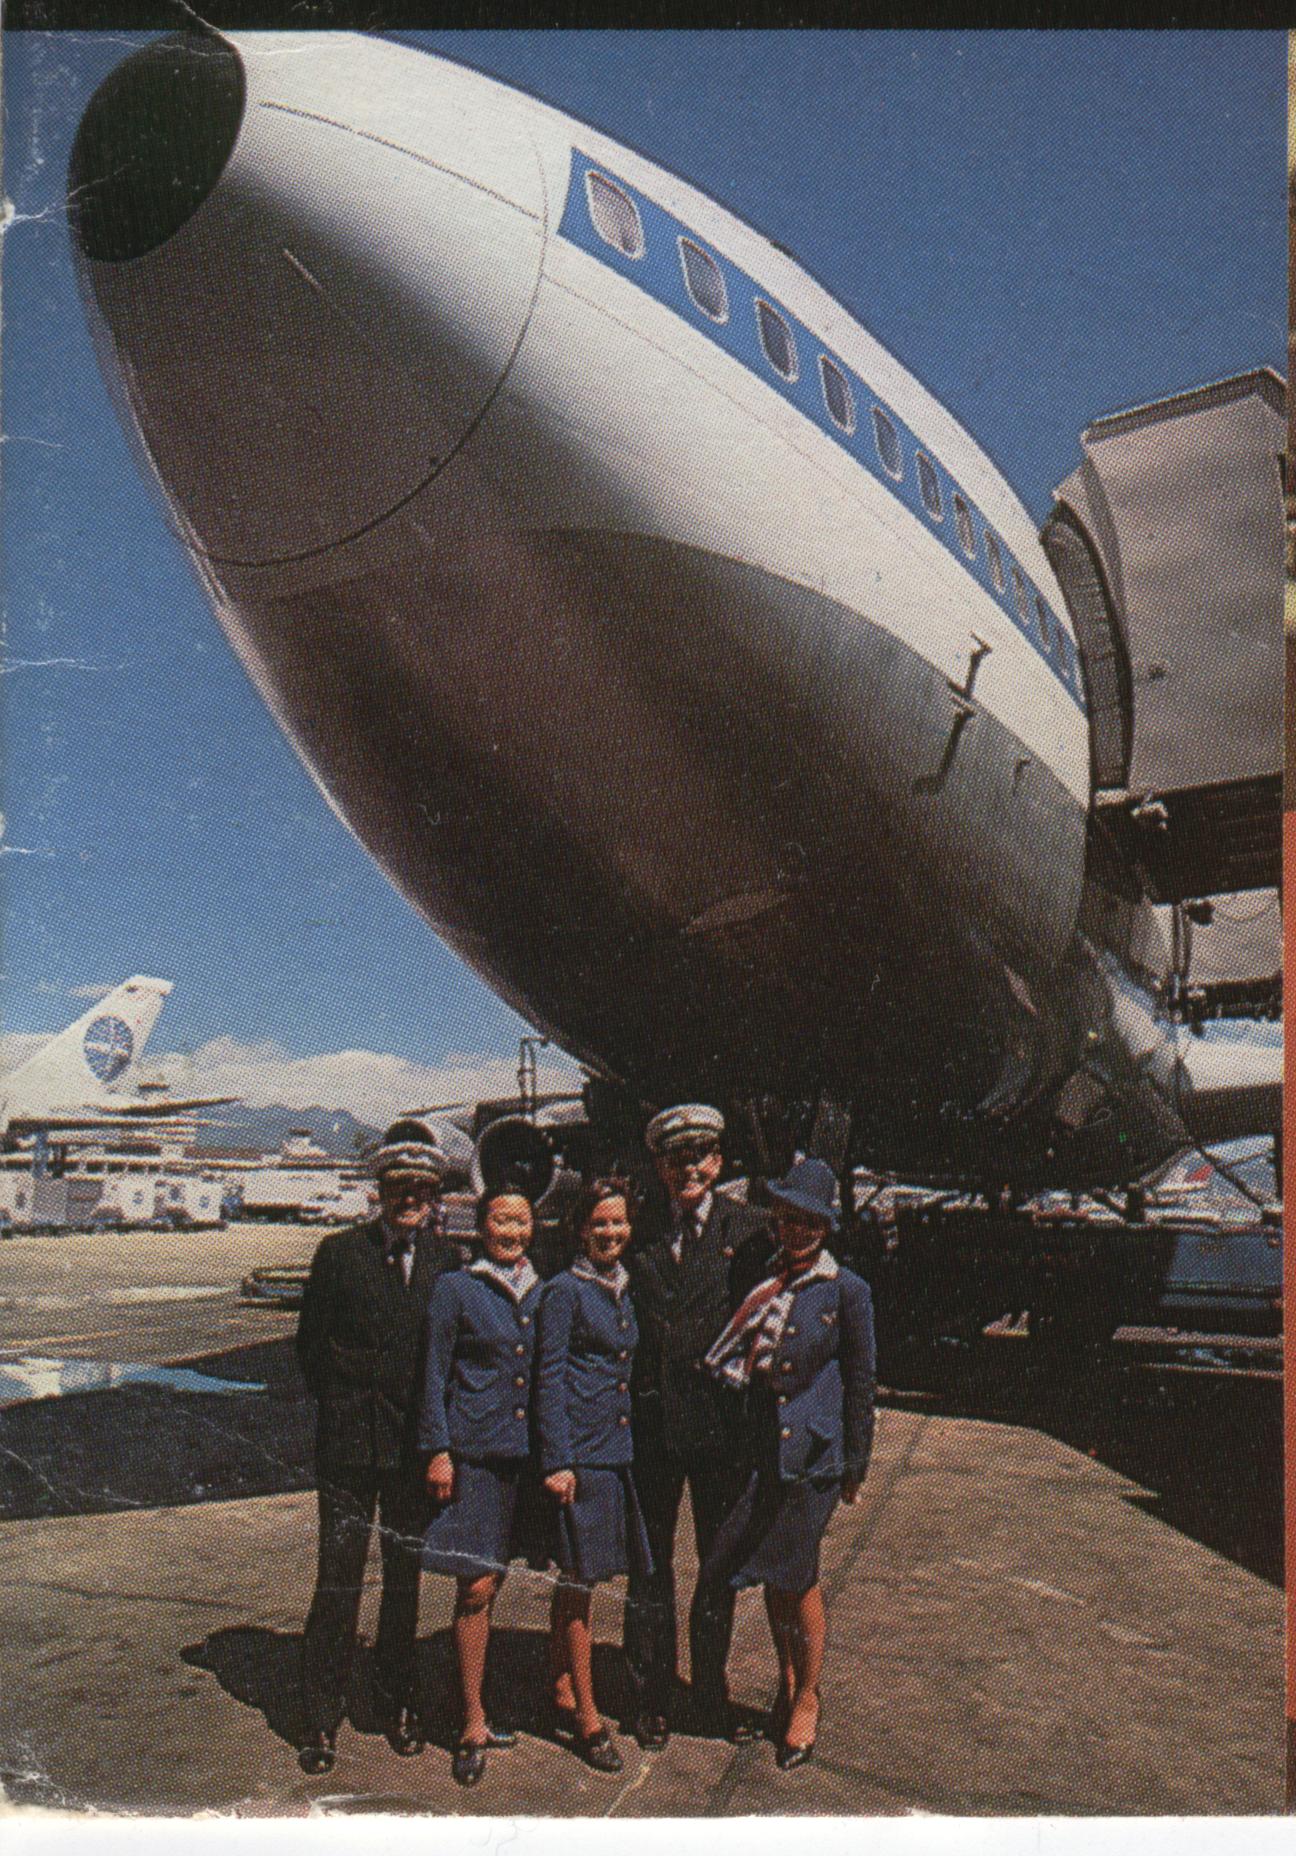 1977 Some Pan Am crew members pose by the nose of a 747 at the gate in San Francisco with the mountains in the background.